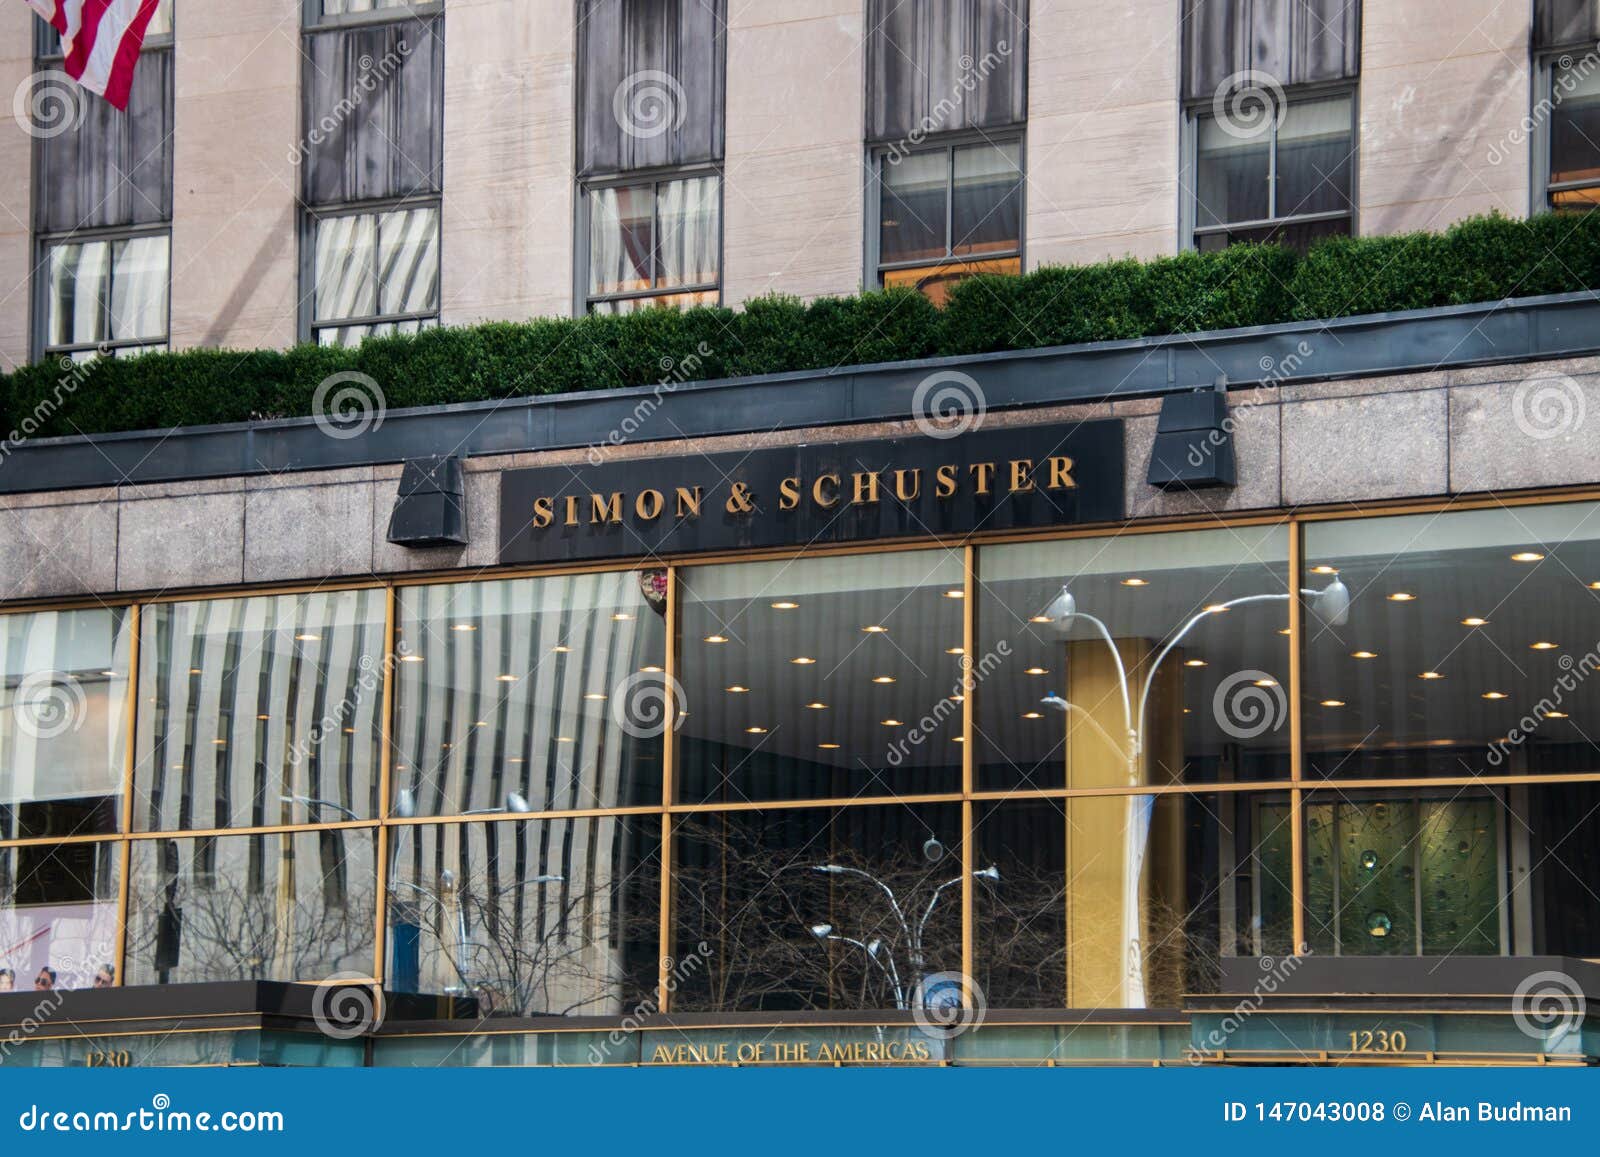 Sign On New York Building For Simon And Schuster Publishing Company 